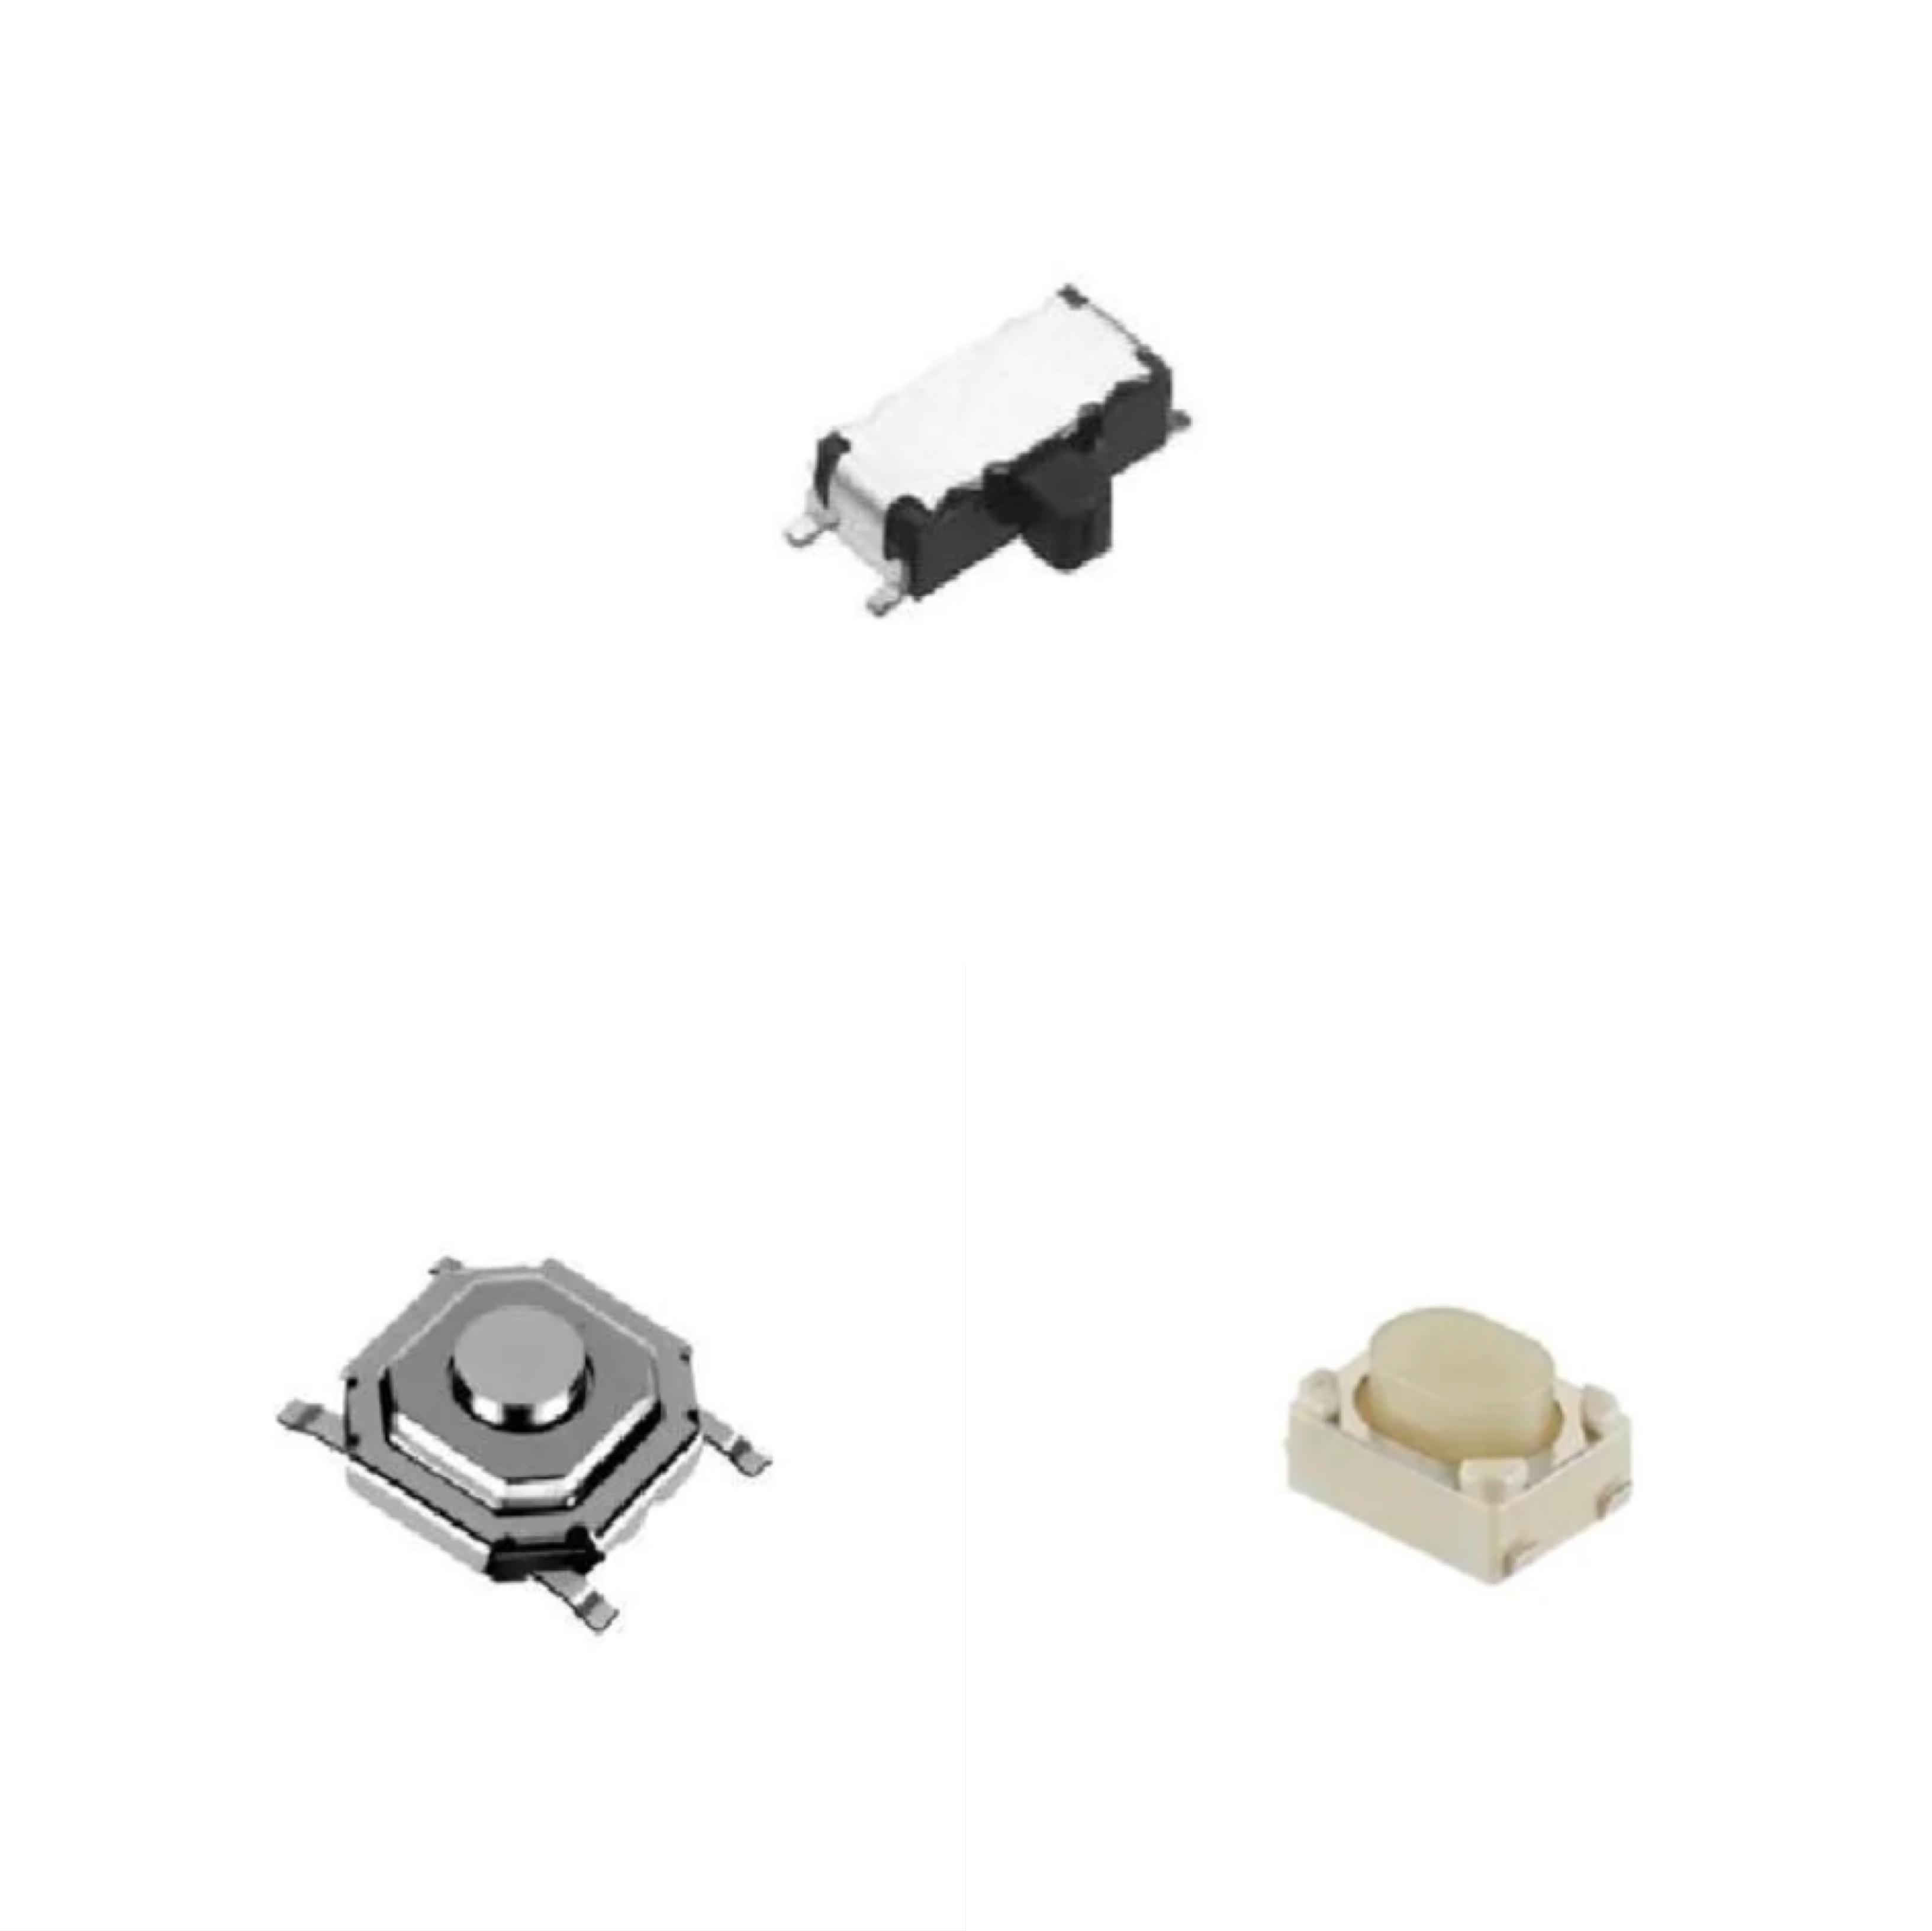 Best quality Development Boards - SKHHAMA010 6x6x5 1.57N SPST 50mA   12VDC Vertical Round Button TThrough Hole Tactile Switches RoHS – Ronghua